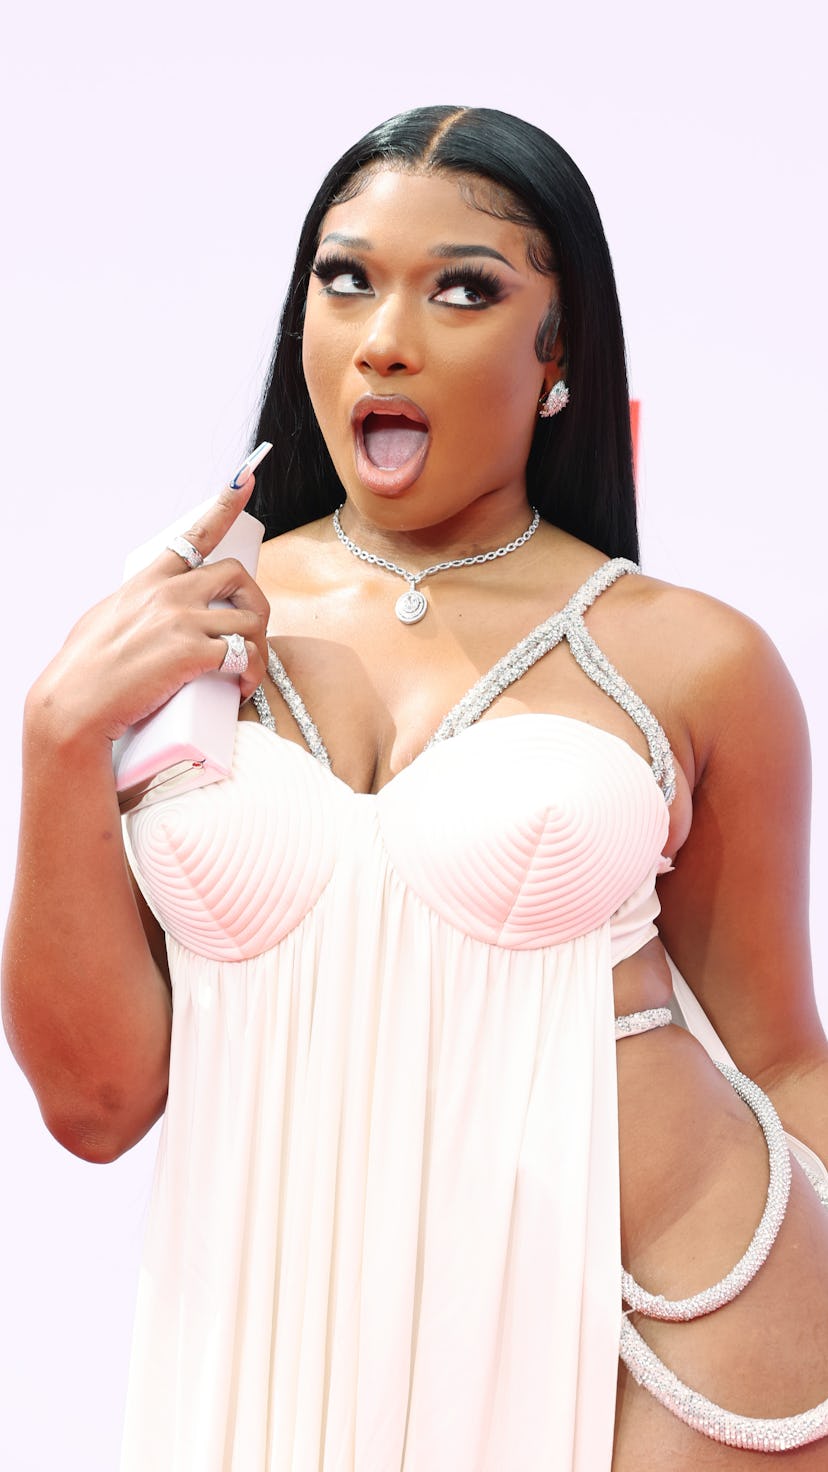 LOS ANGELES, CALIFORNIA - JUNE 27: Megan Thee Stallion attends the BET Awards 2021 at Microsoft Thea...